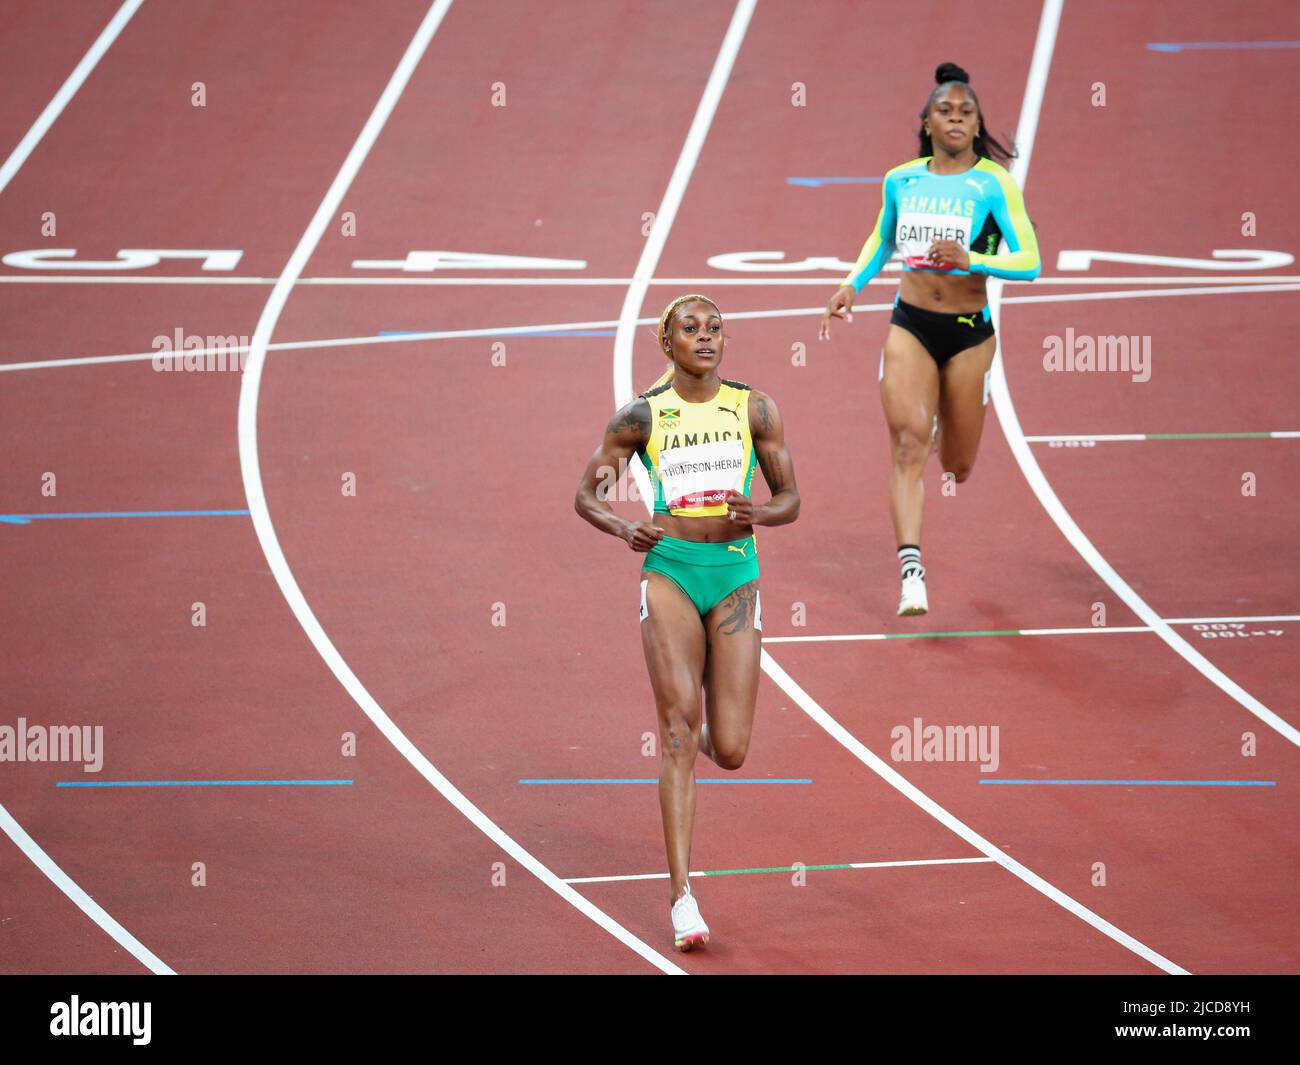 JULY 31st, 2021 - TOKYO, JAPAN: Elaine Thompson-Herah of Jamaica and Tynia Gaither of Bahamas in action during the Women's 100m Semi-Finals at the Tok Stock Photo